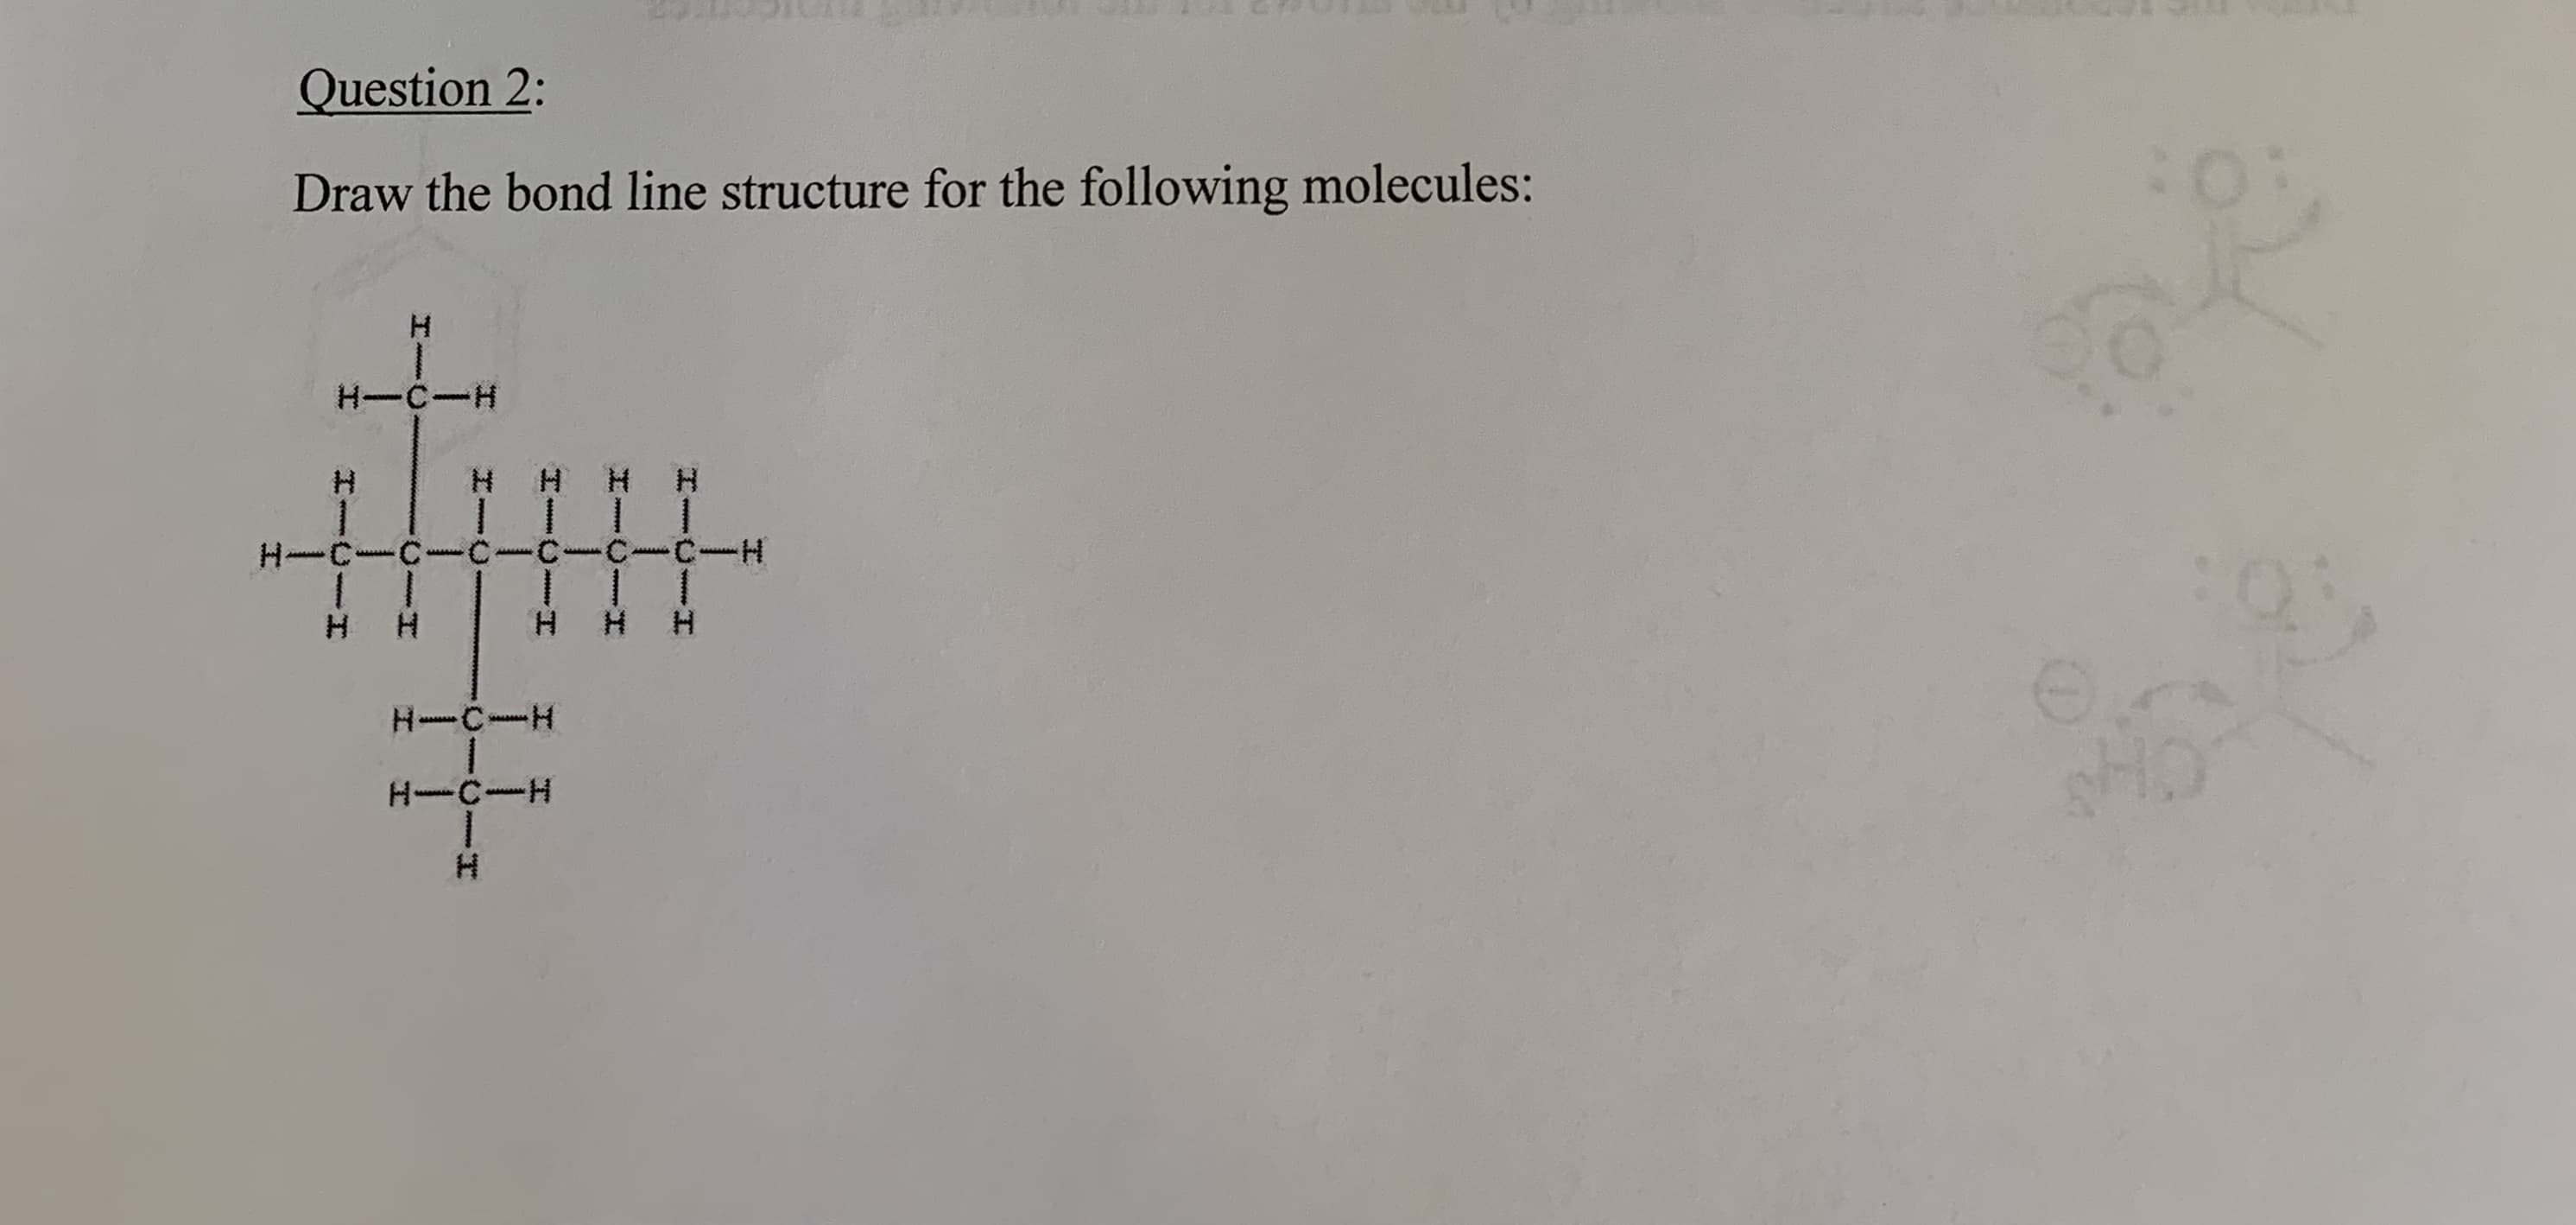 Draw the bond line structure for the following molecules:
H-C-H
H H H H
H-C-C-C-C-C-C-
H H
H H H
H-C-H
H-C-H
1.
H.
